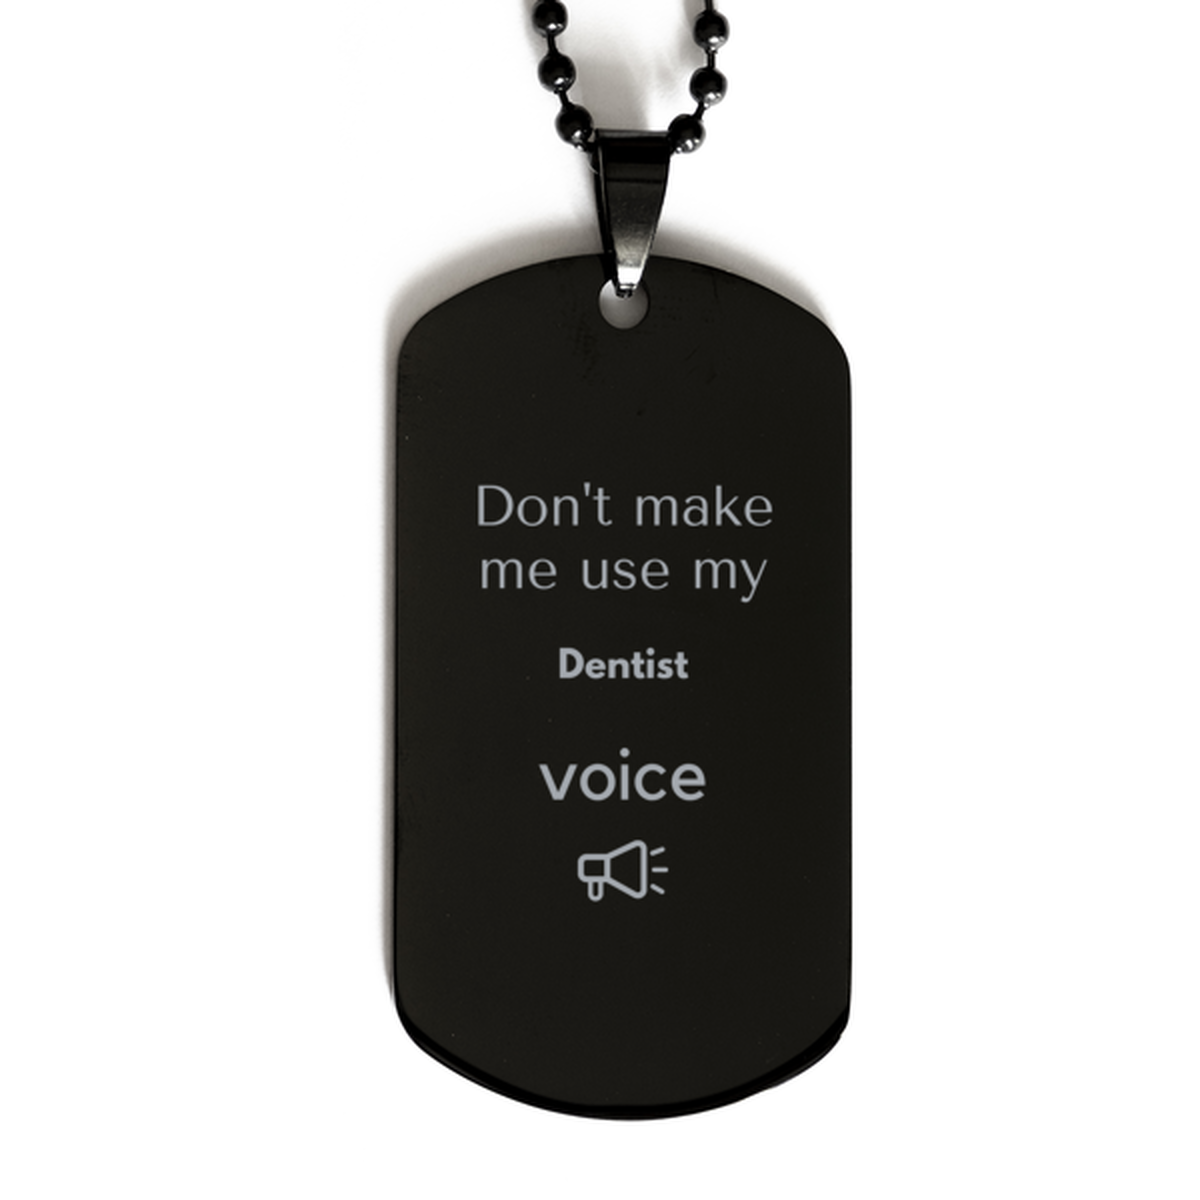 Don't make me use my Dentist voice, Sarcasm Dentist Gifts, Christmas Dentist Black Dog Tag Birthday Unique Gifts For Dentist Coworkers, Men, Women, Colleague, Friends